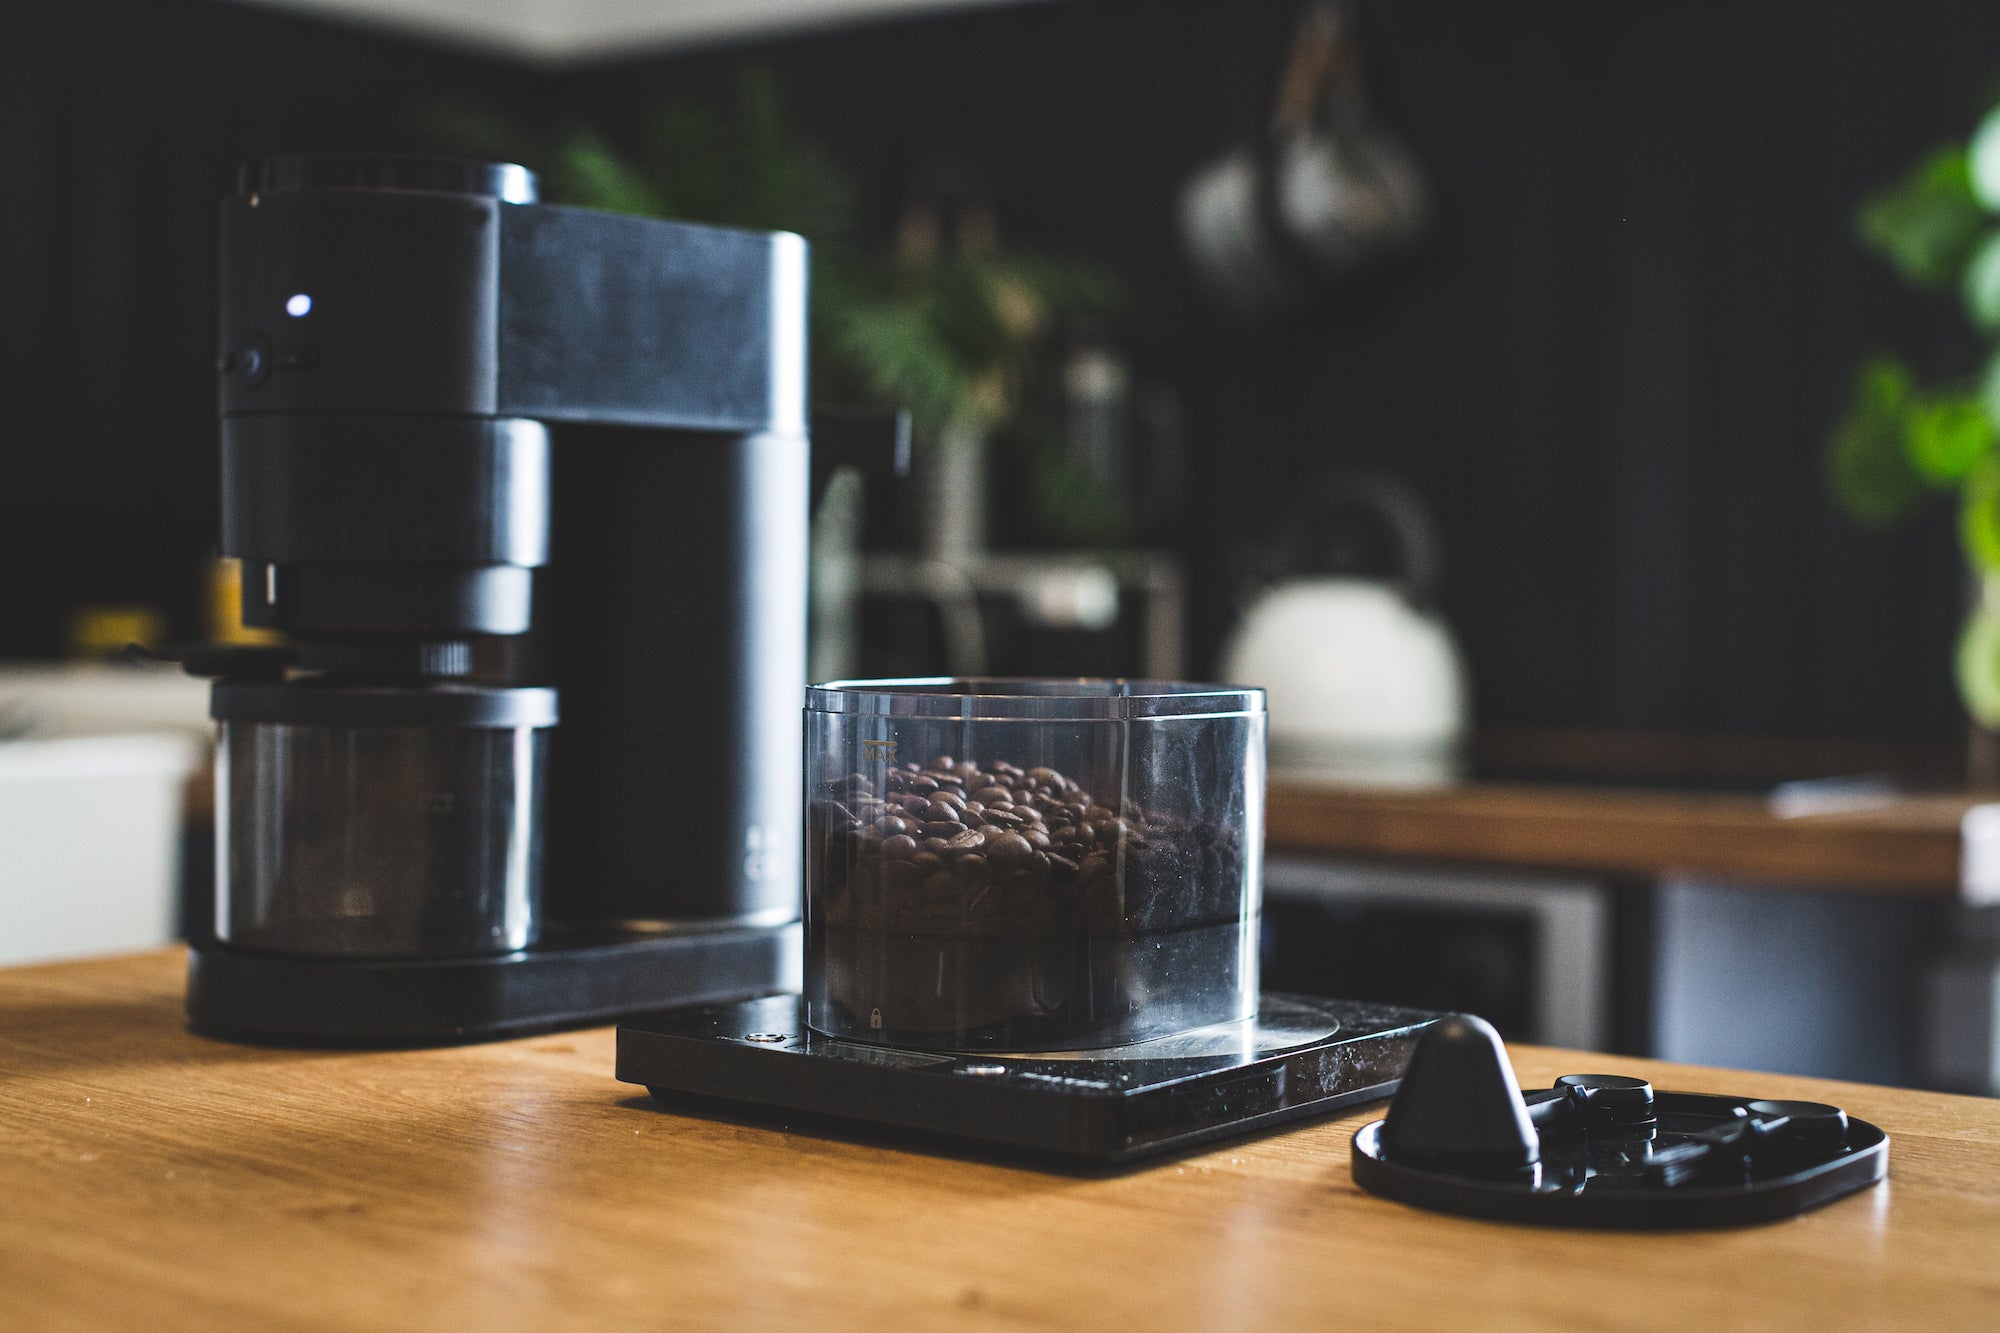 Barista & Co All Core Grind coffee maker - enter giveaway with Wingback